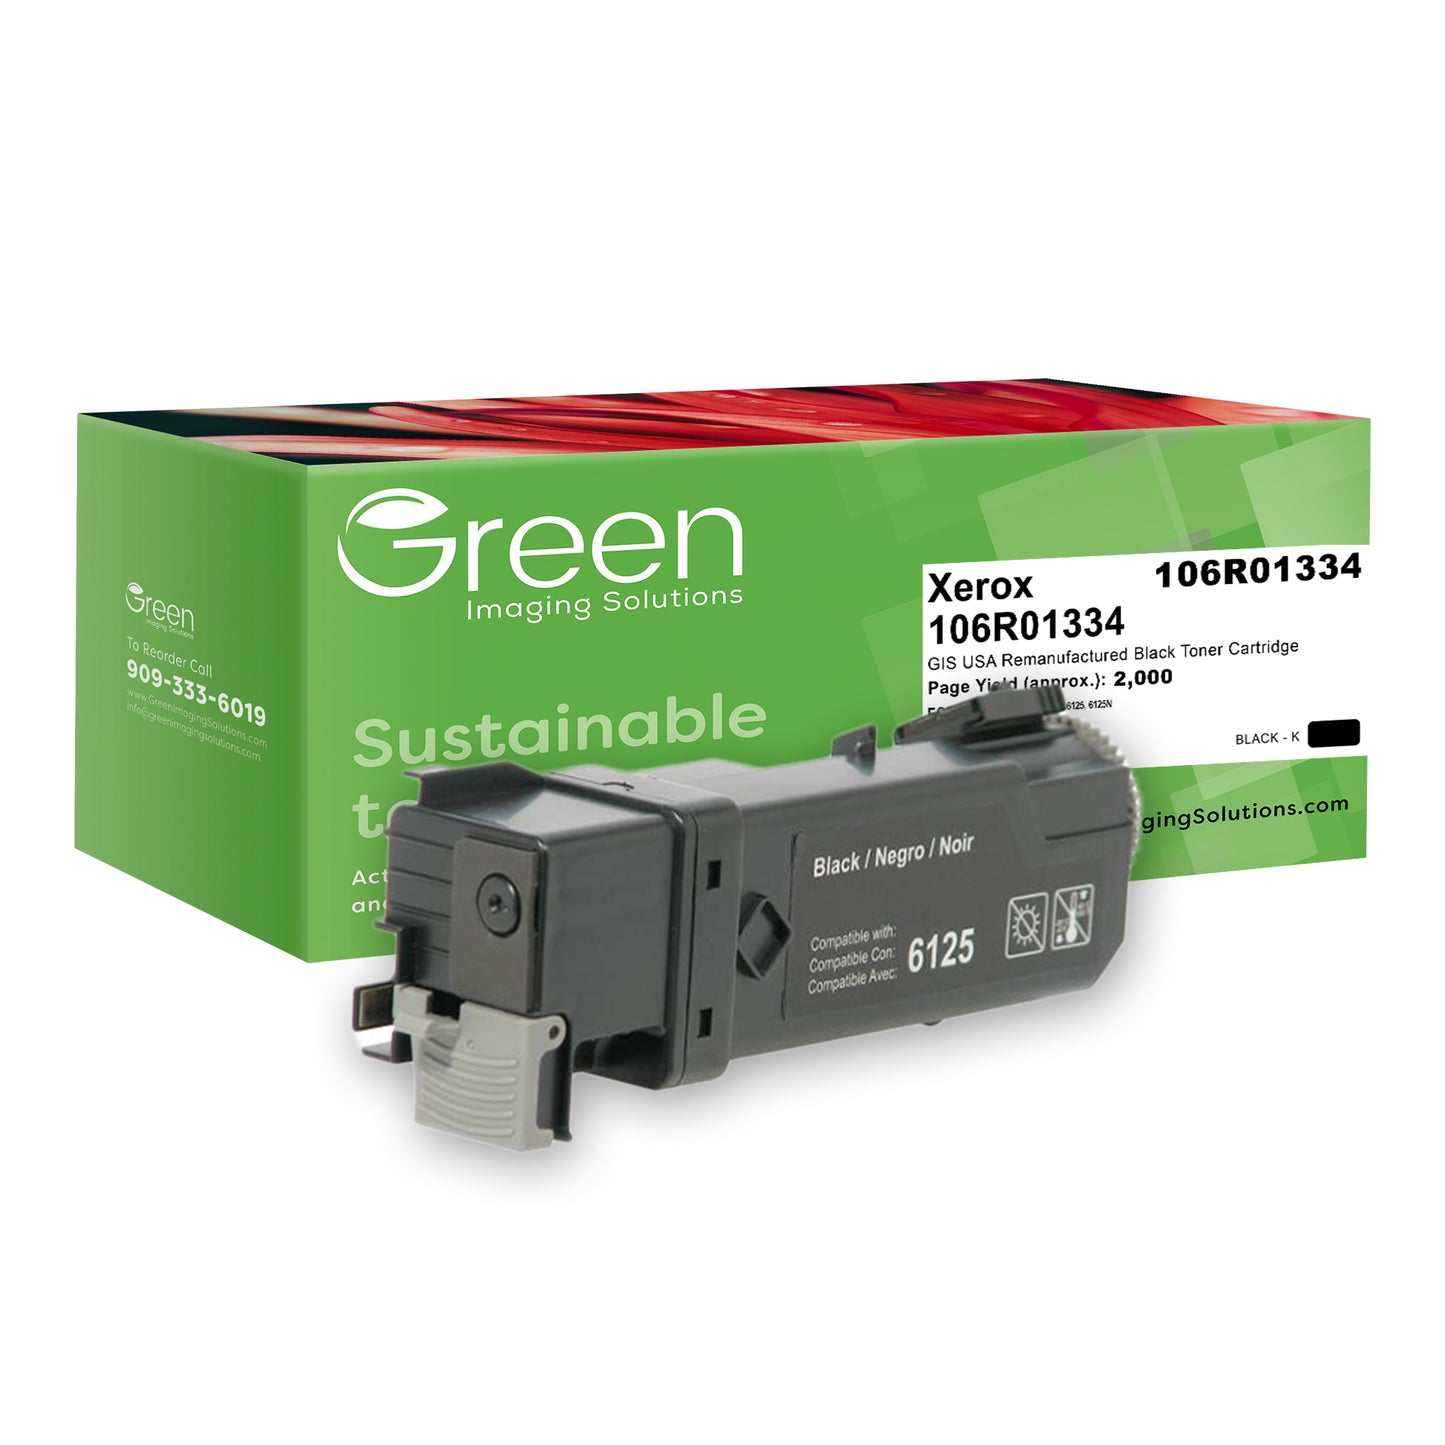 Green Imaging Solutions USA Remanufactured Non-OEM New Black Toner Cartridge for Xerox 106R01334